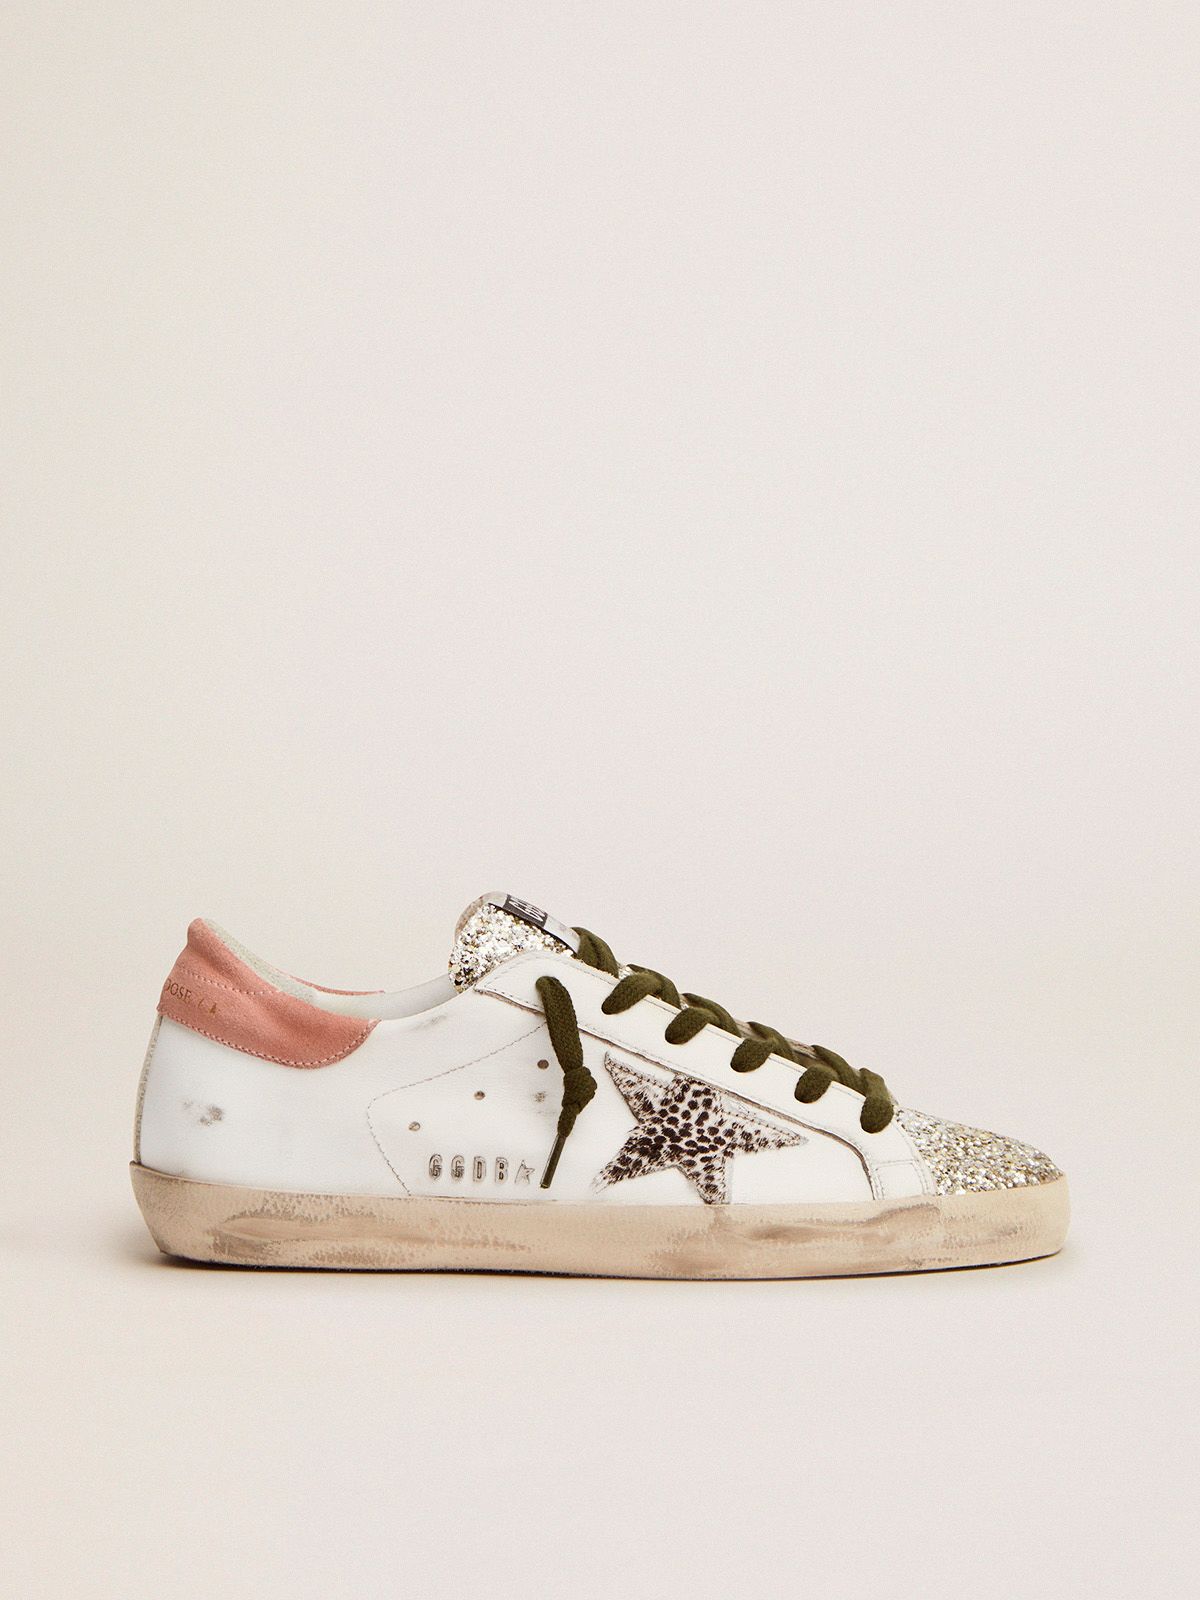 golden goose sneakers animal-print skin glitter and pony star silver Super-Star LTD with